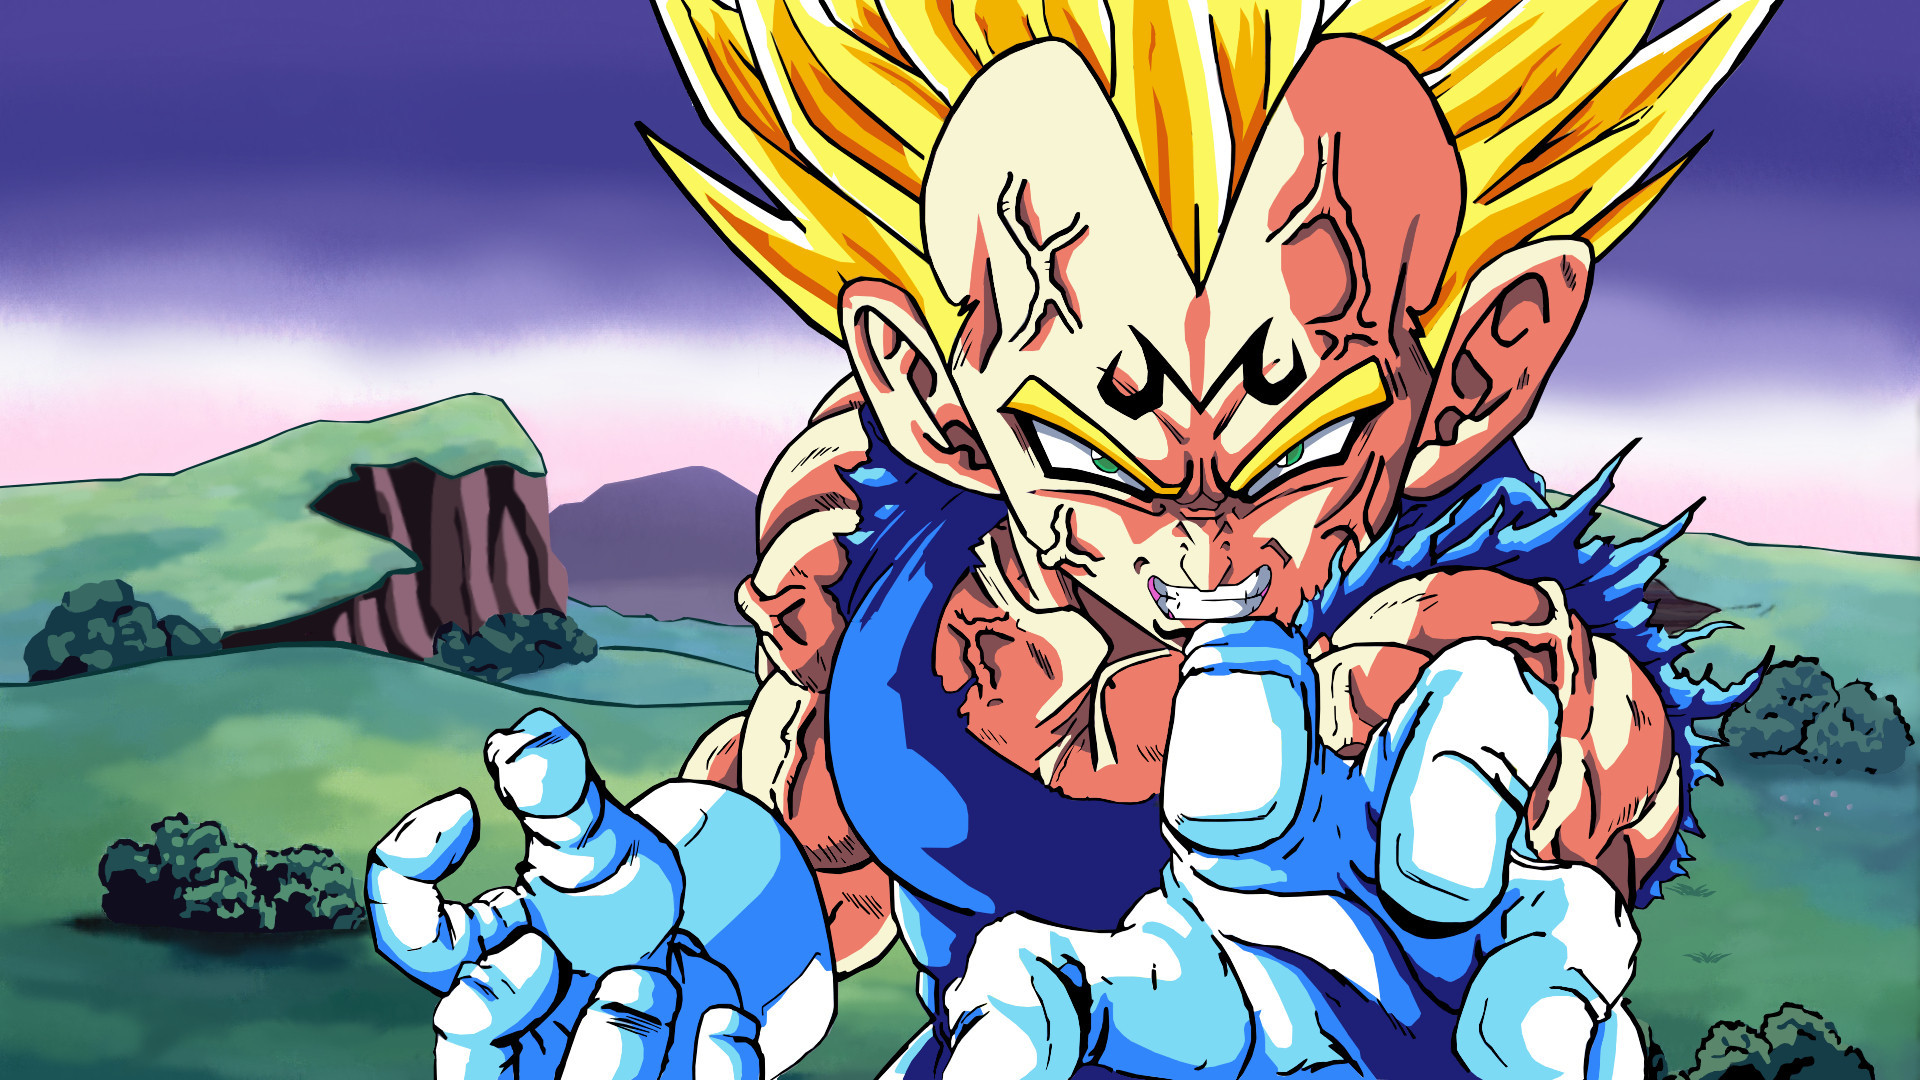 1920x1080 I made a Majin Vegeta wallpaper! Check it out! [] (I saw that cool  drawing the other day and wanted a wallpaper of it) ...